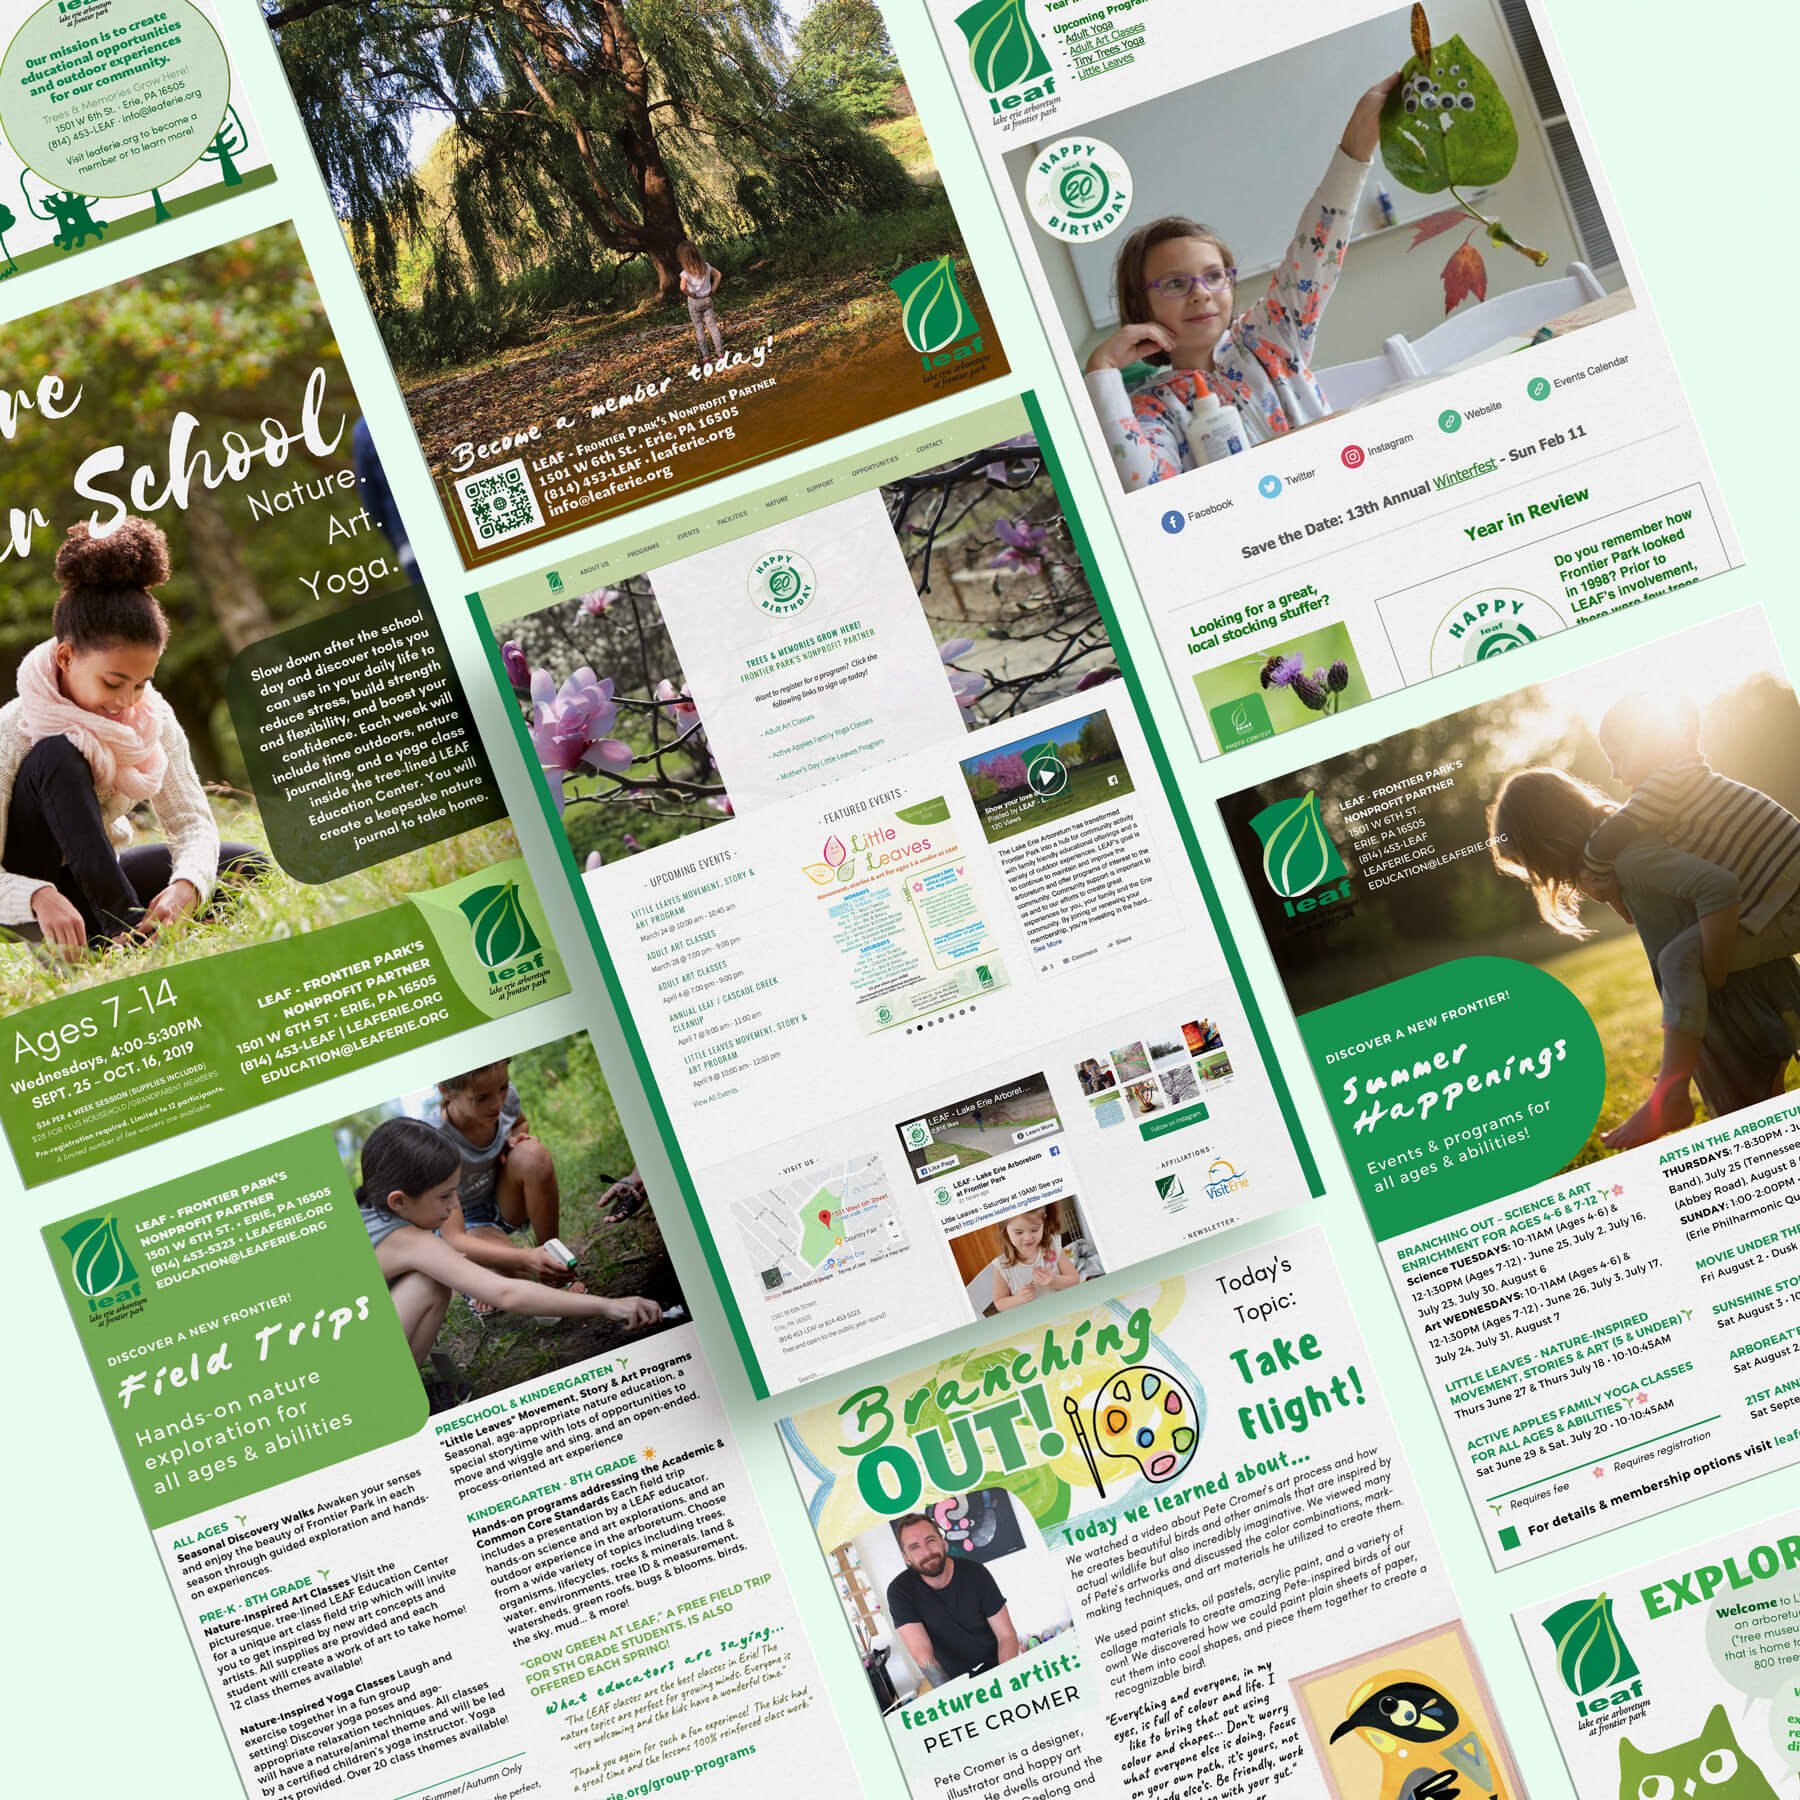 images of marketing materials and a website designed for a nature center